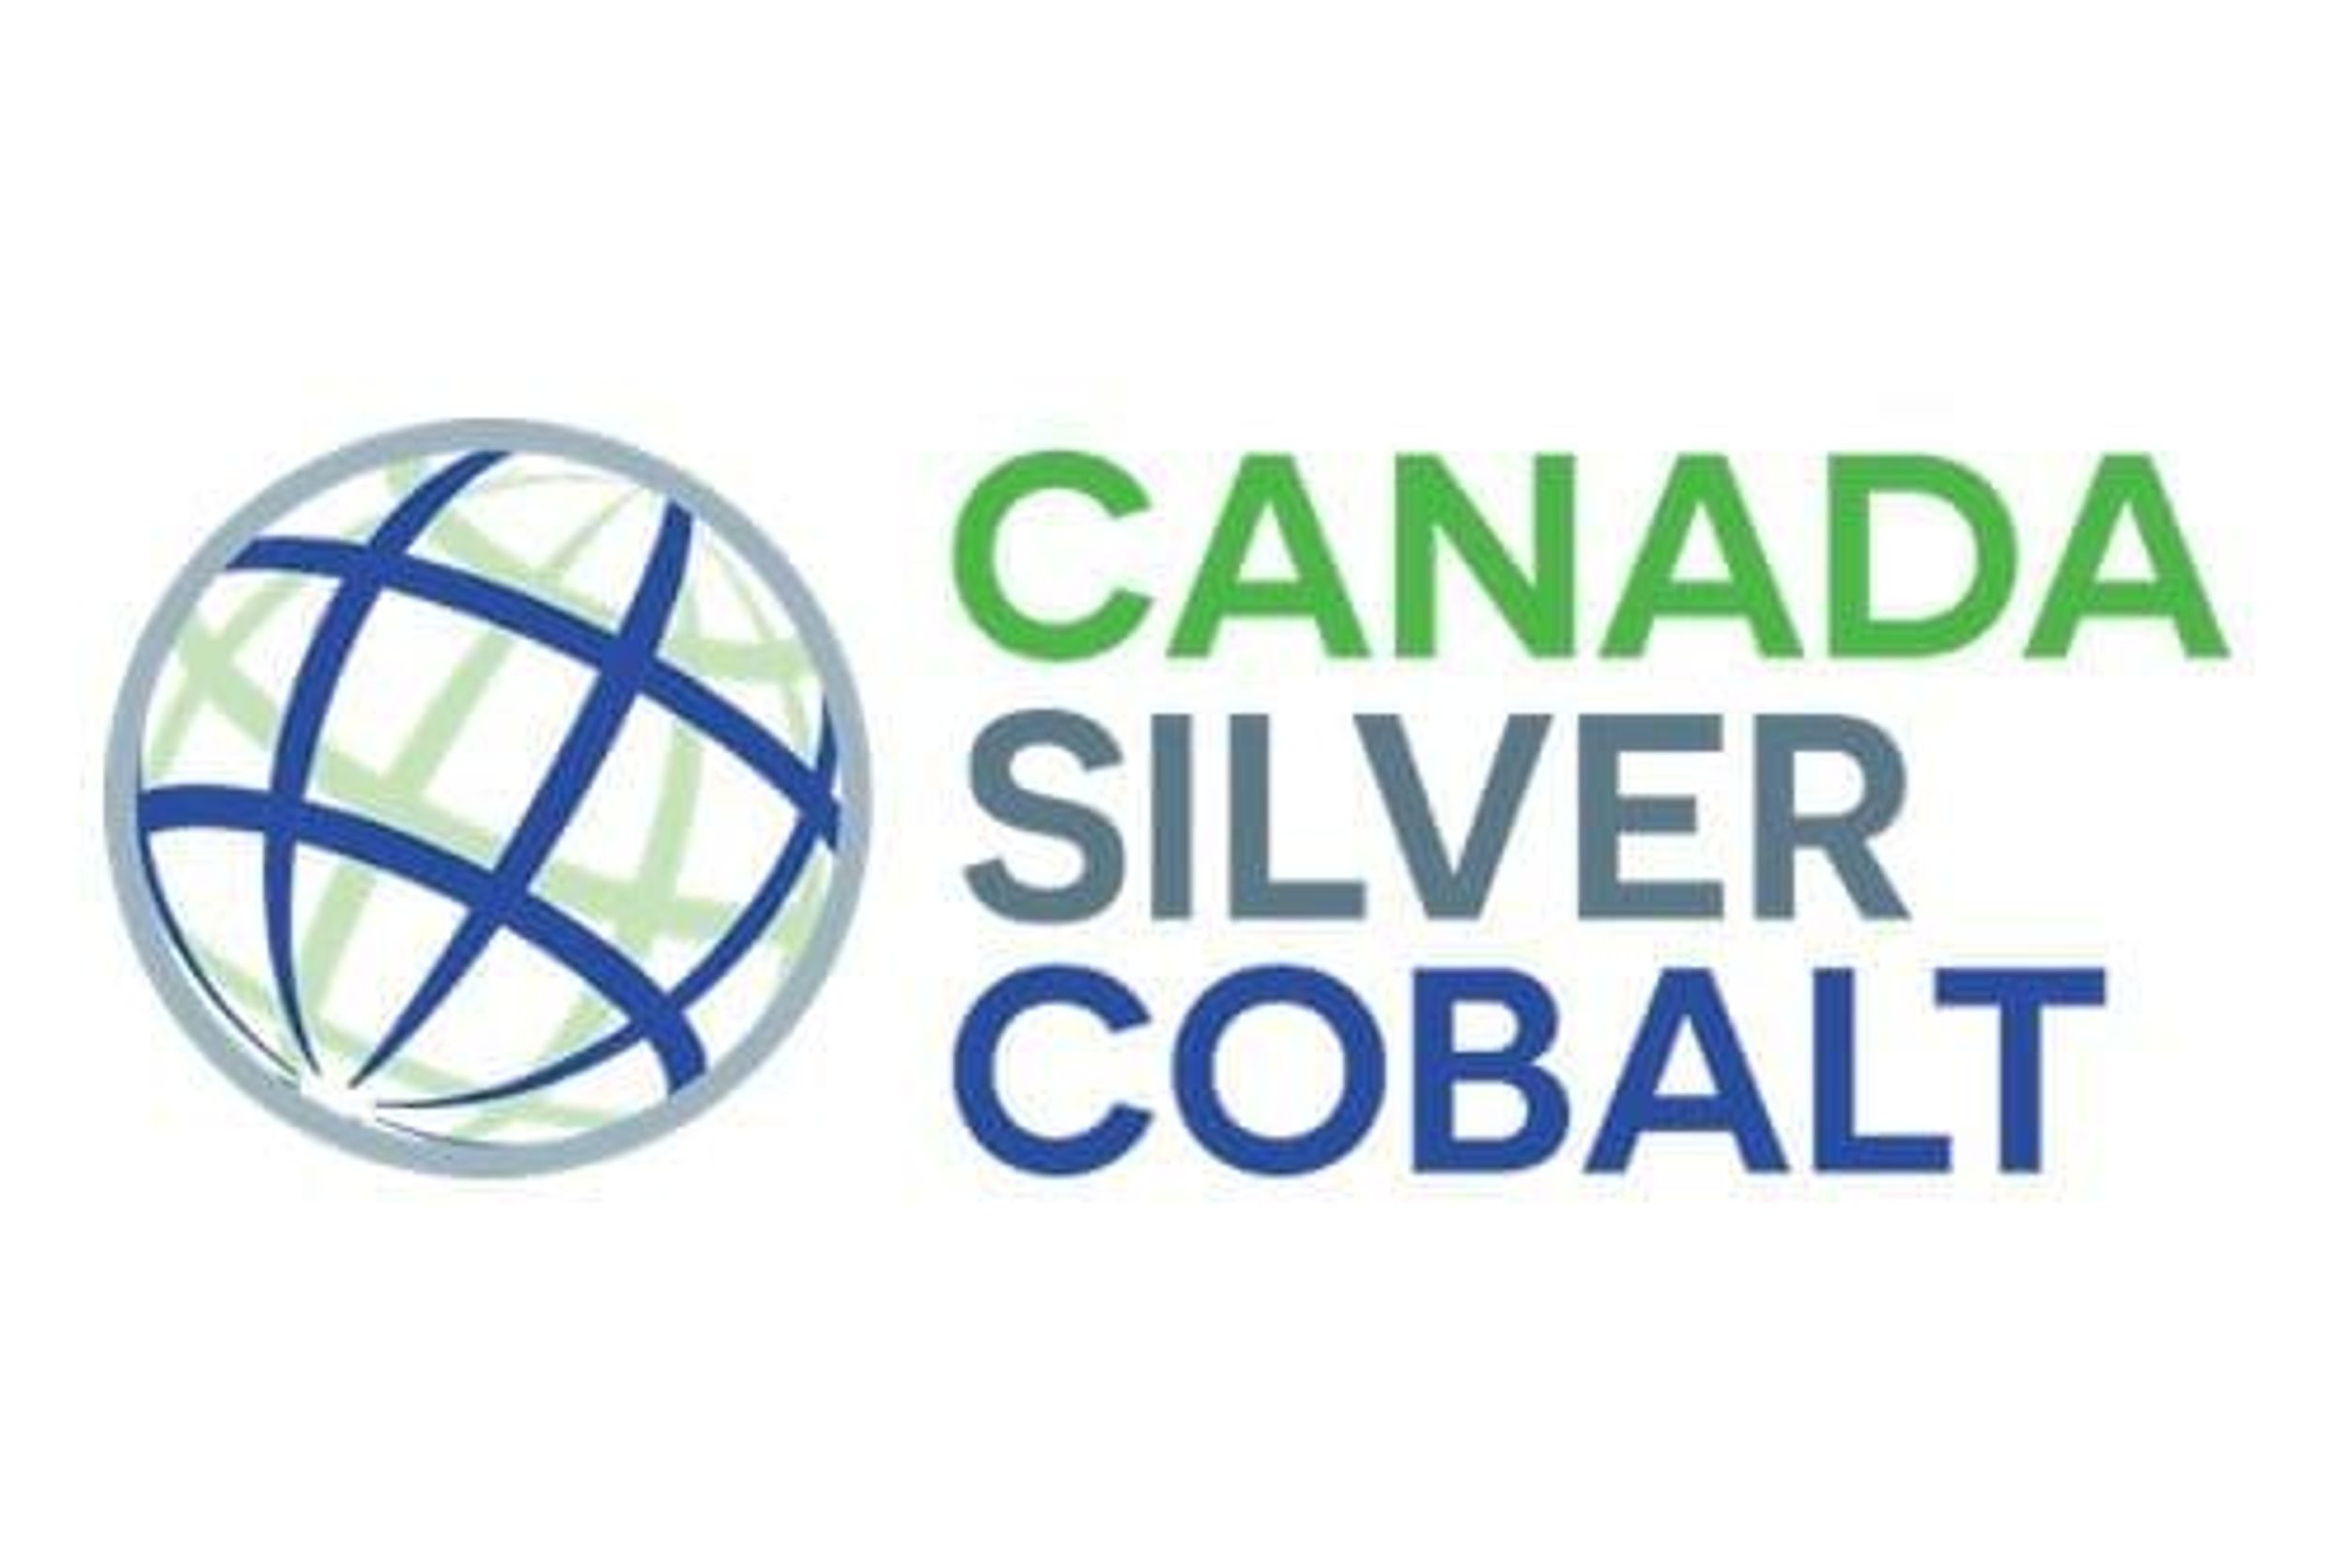 Canada Silver Cobalt Intersects High-Grade Silver Up to 6,188.43 g/t Ag with a Gold Equivalent of 74.67 g/t Au at Castle East